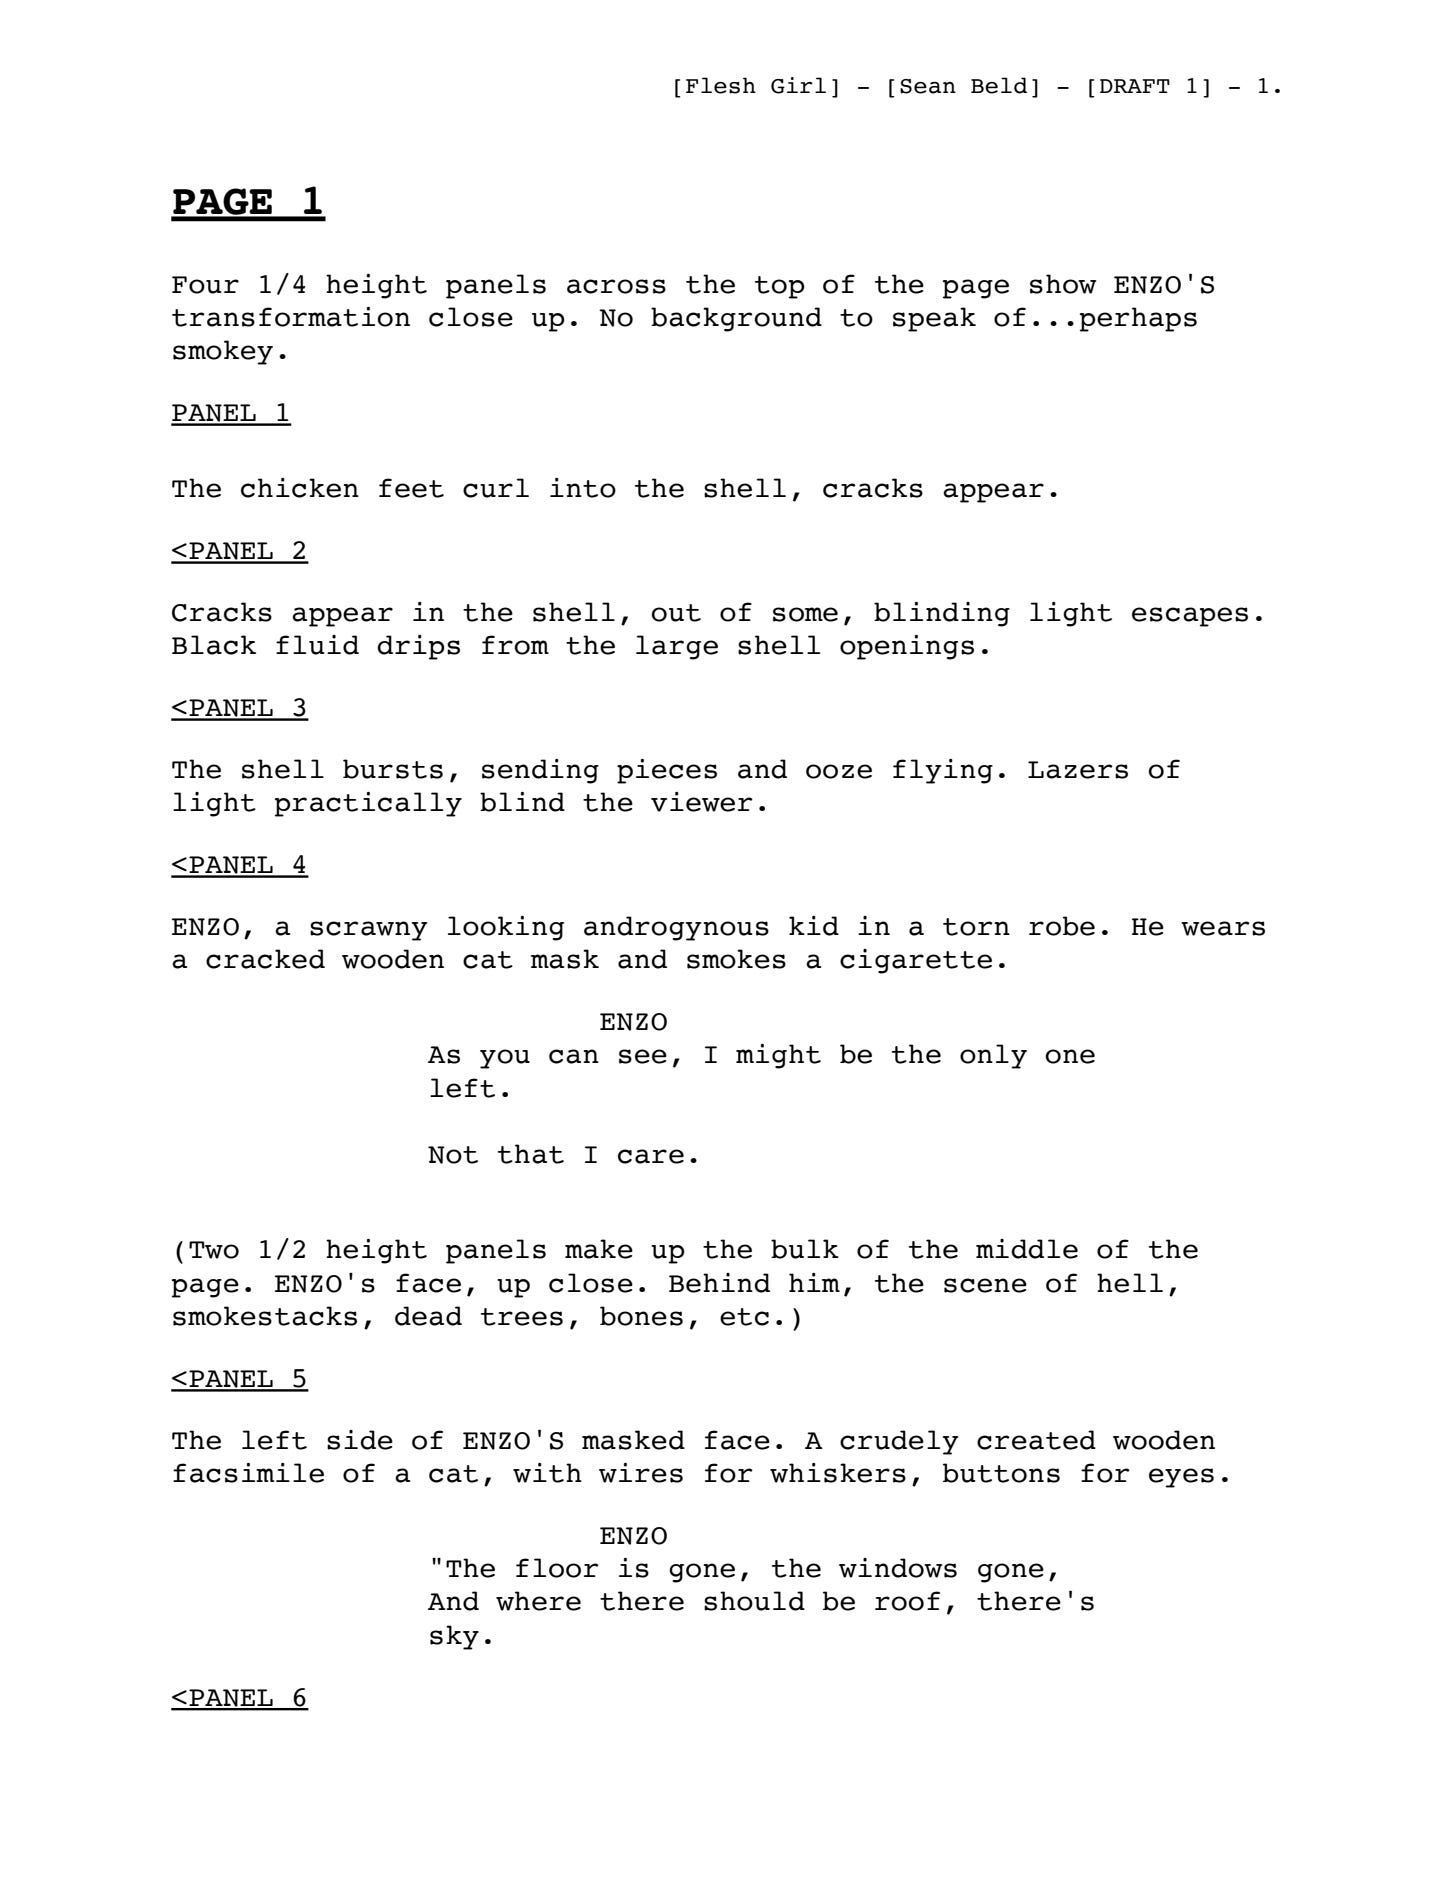 The script for page 5. 